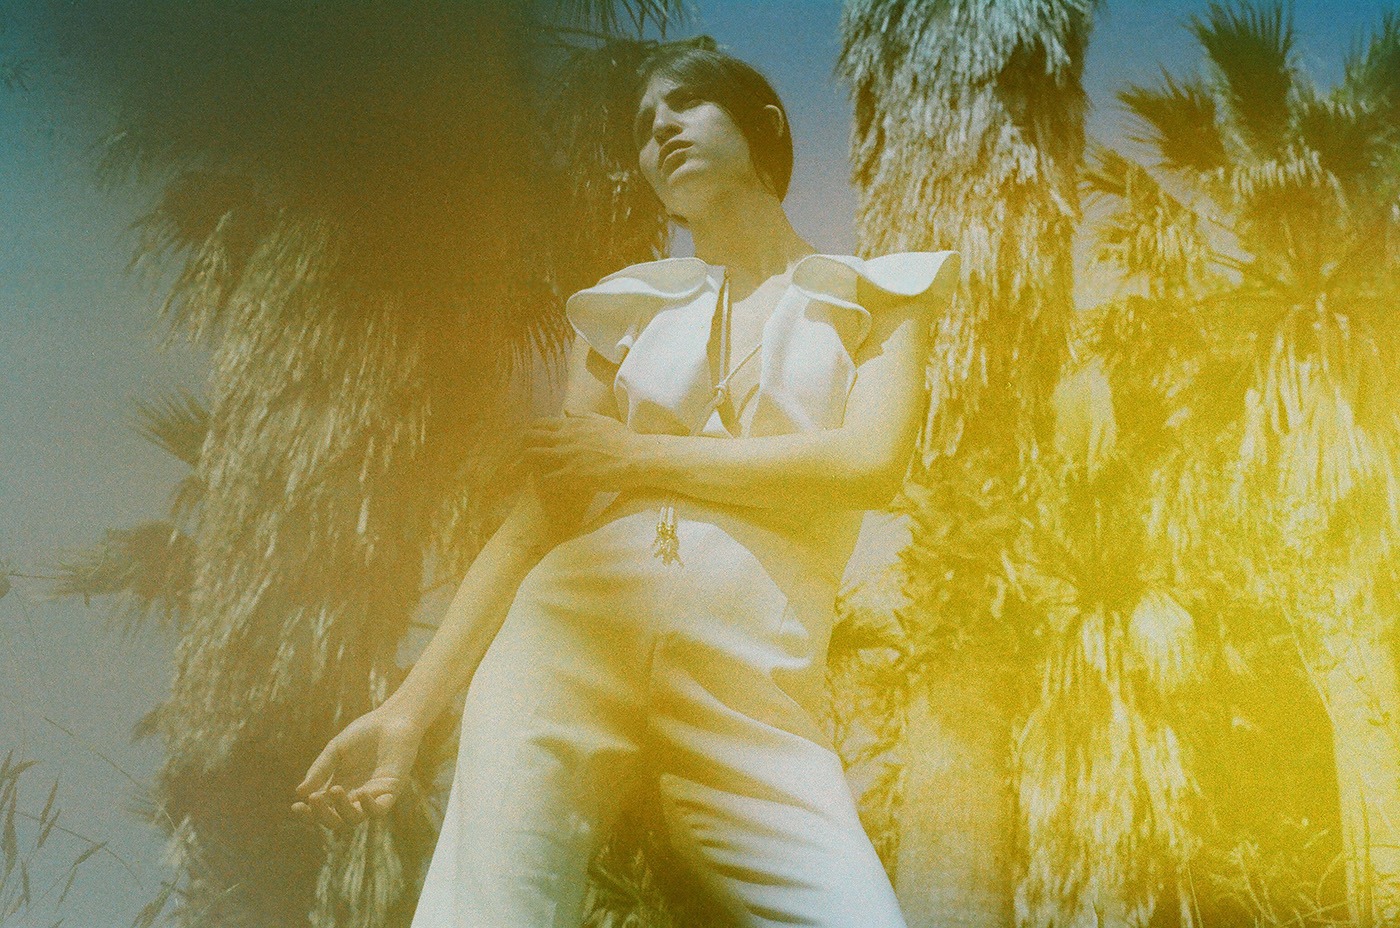 Beautiful girl in a white suit among the palm trees. Shooting on expired film with broken camera.